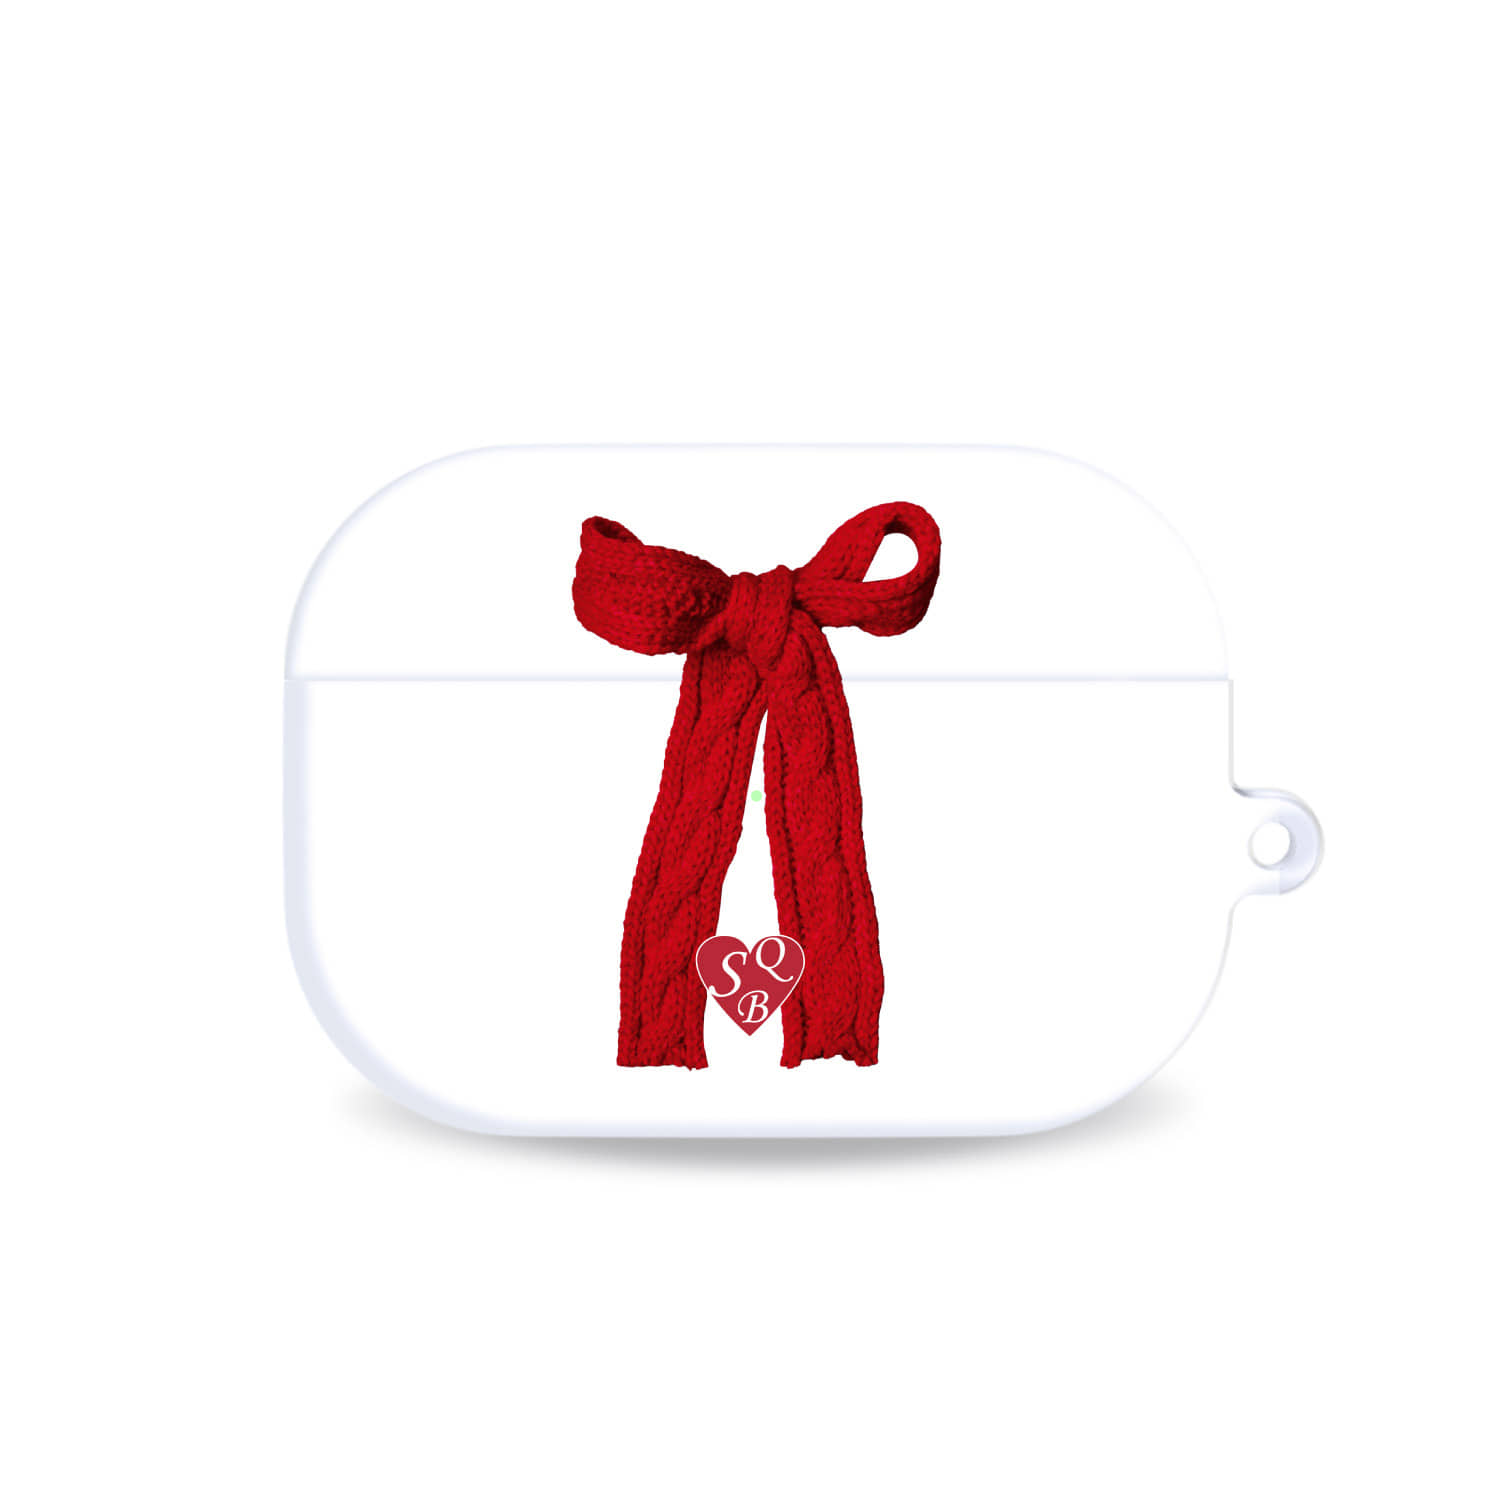 [airpods case] Red knit ribbon airpods case